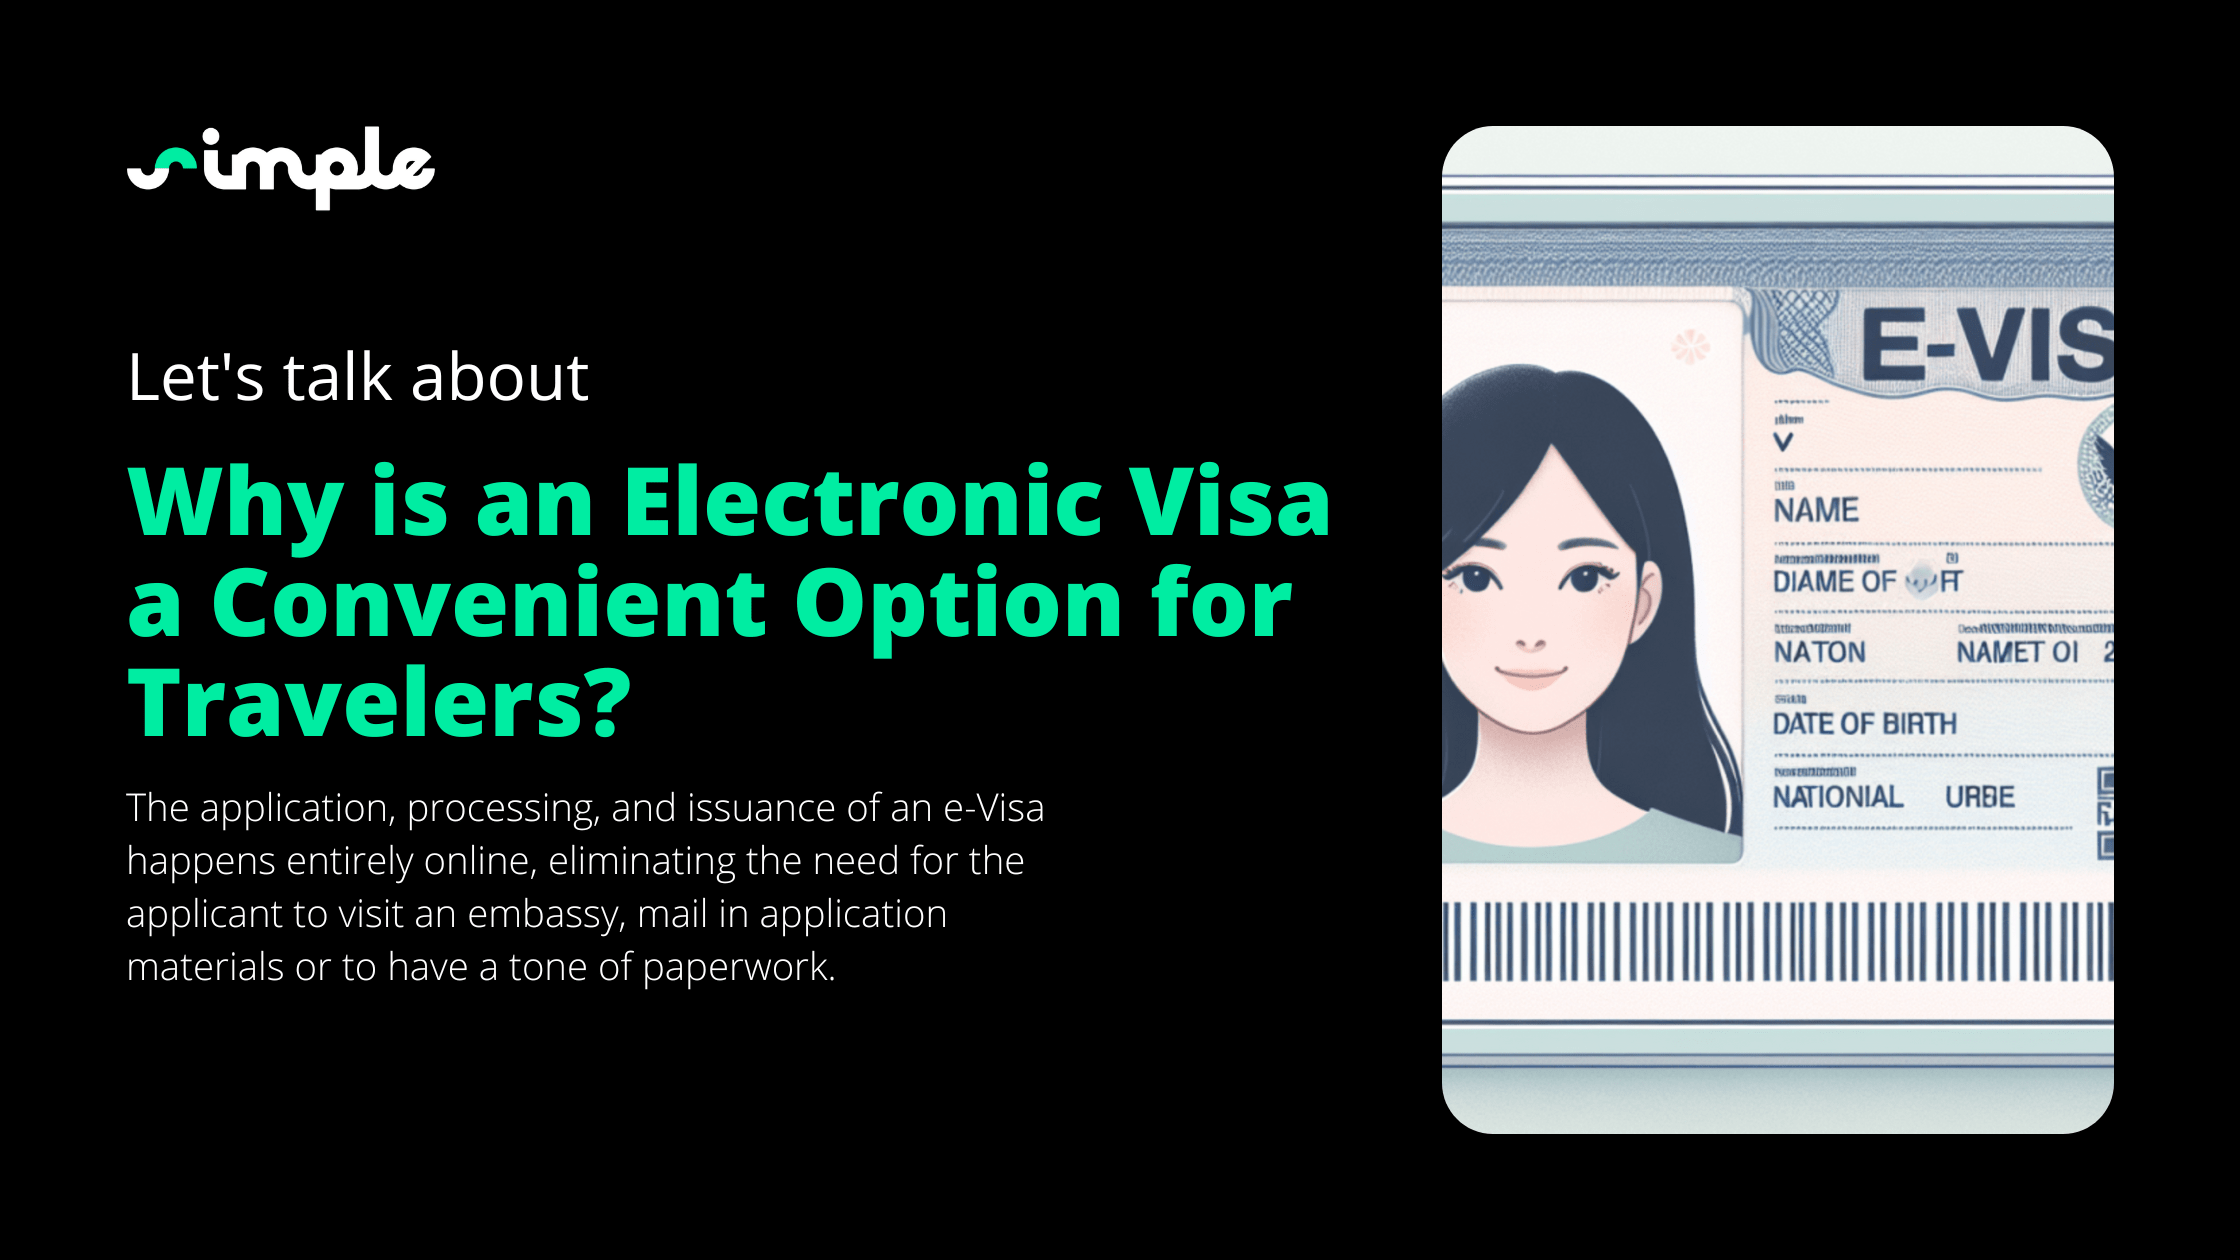 Why 1 Electronic Visa is a Convenient Option for Travelers?